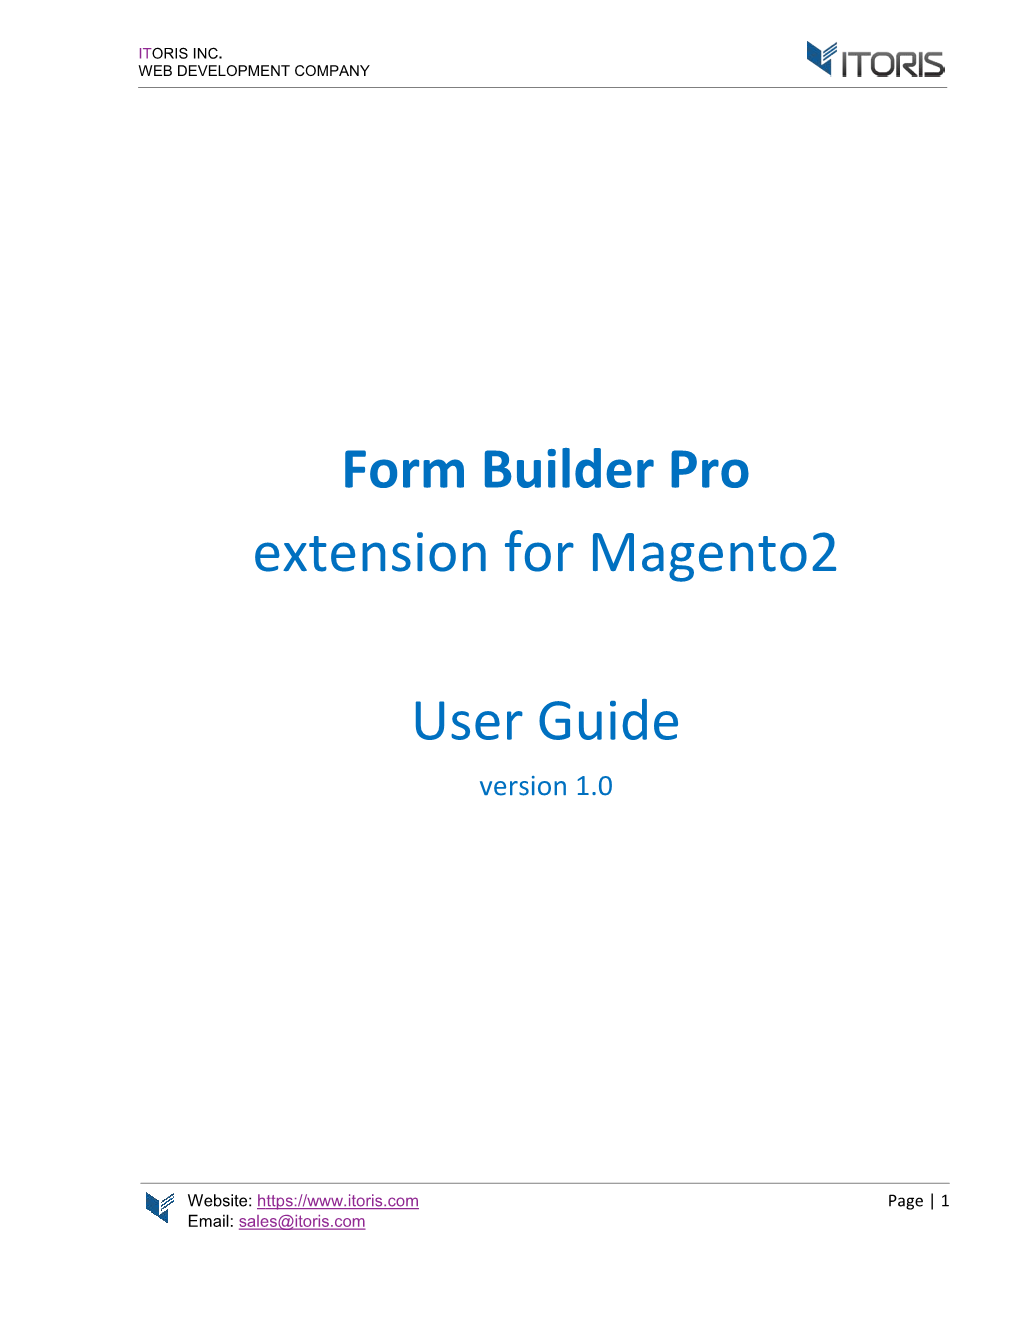 Form Builder Pro for Magento 2.X User Guide